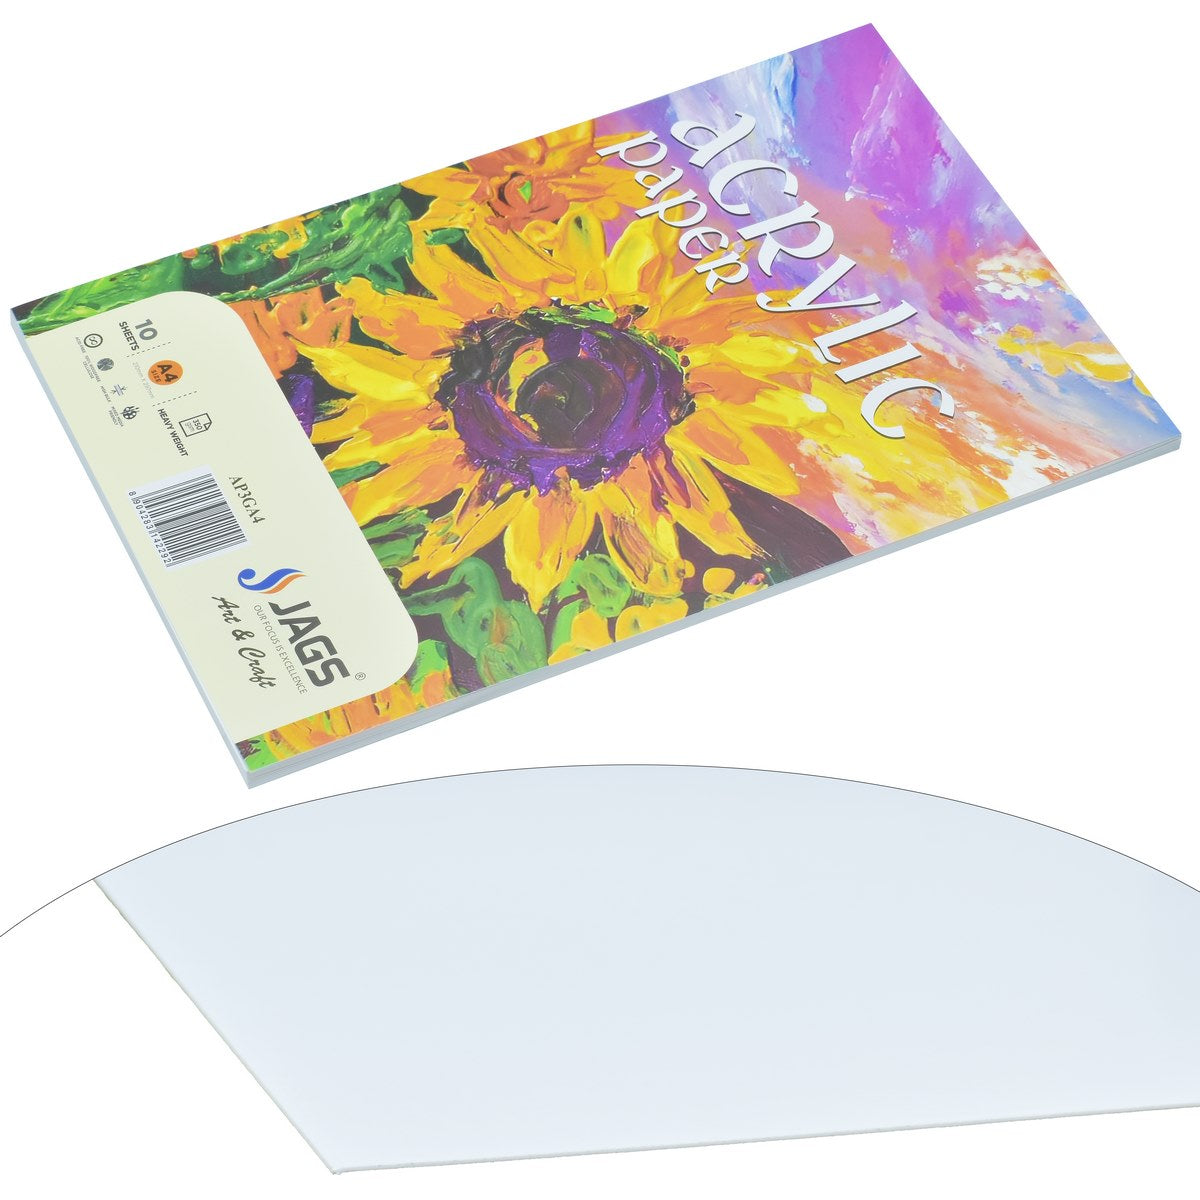 jags-mumbai Paper High-Quality 350gsm Acrylic Paper for Mixed Media - A4 Size 10 Sheets